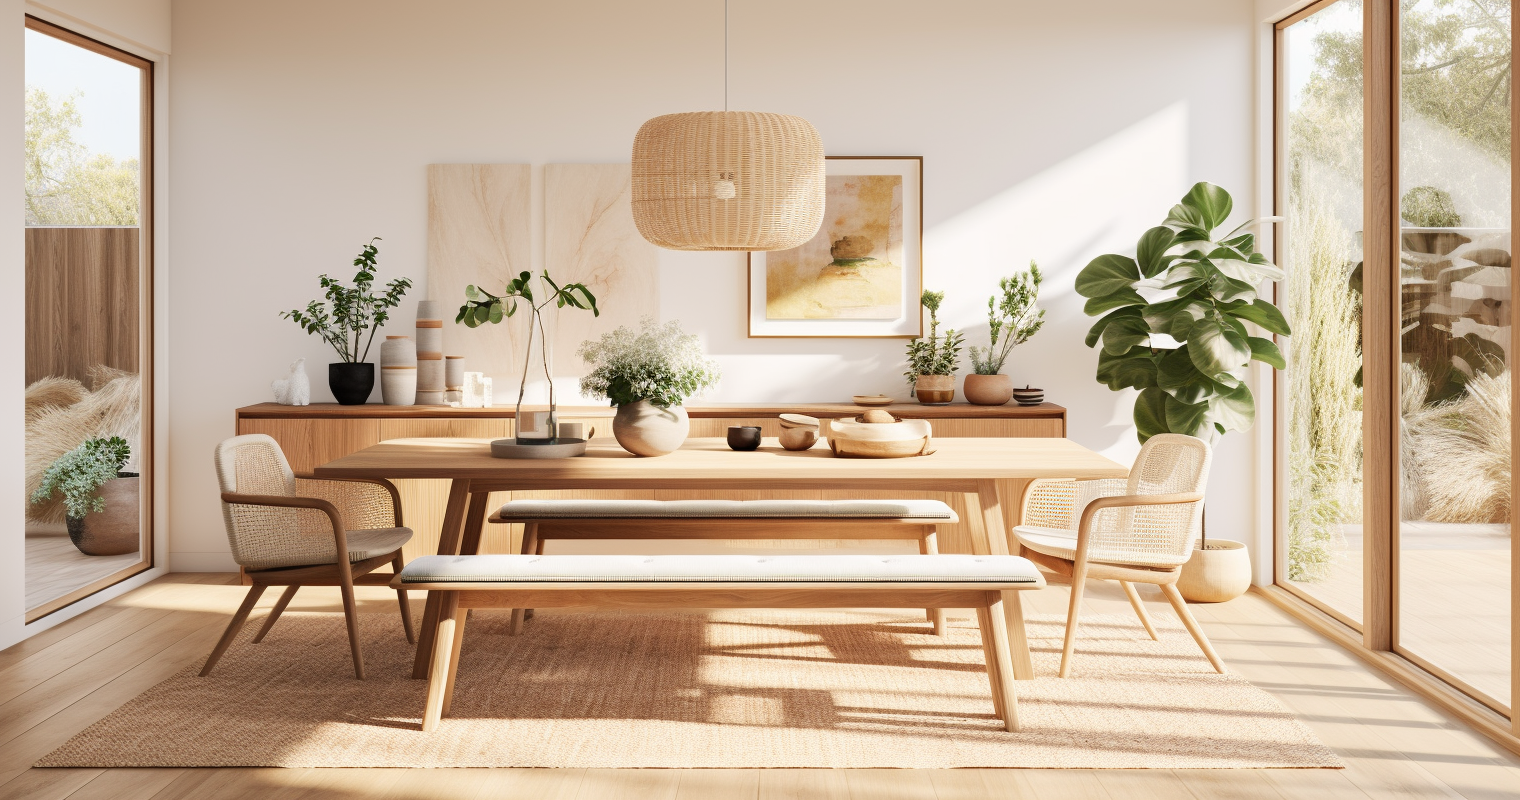 Japandi-inspired Dining Area with Natural Light